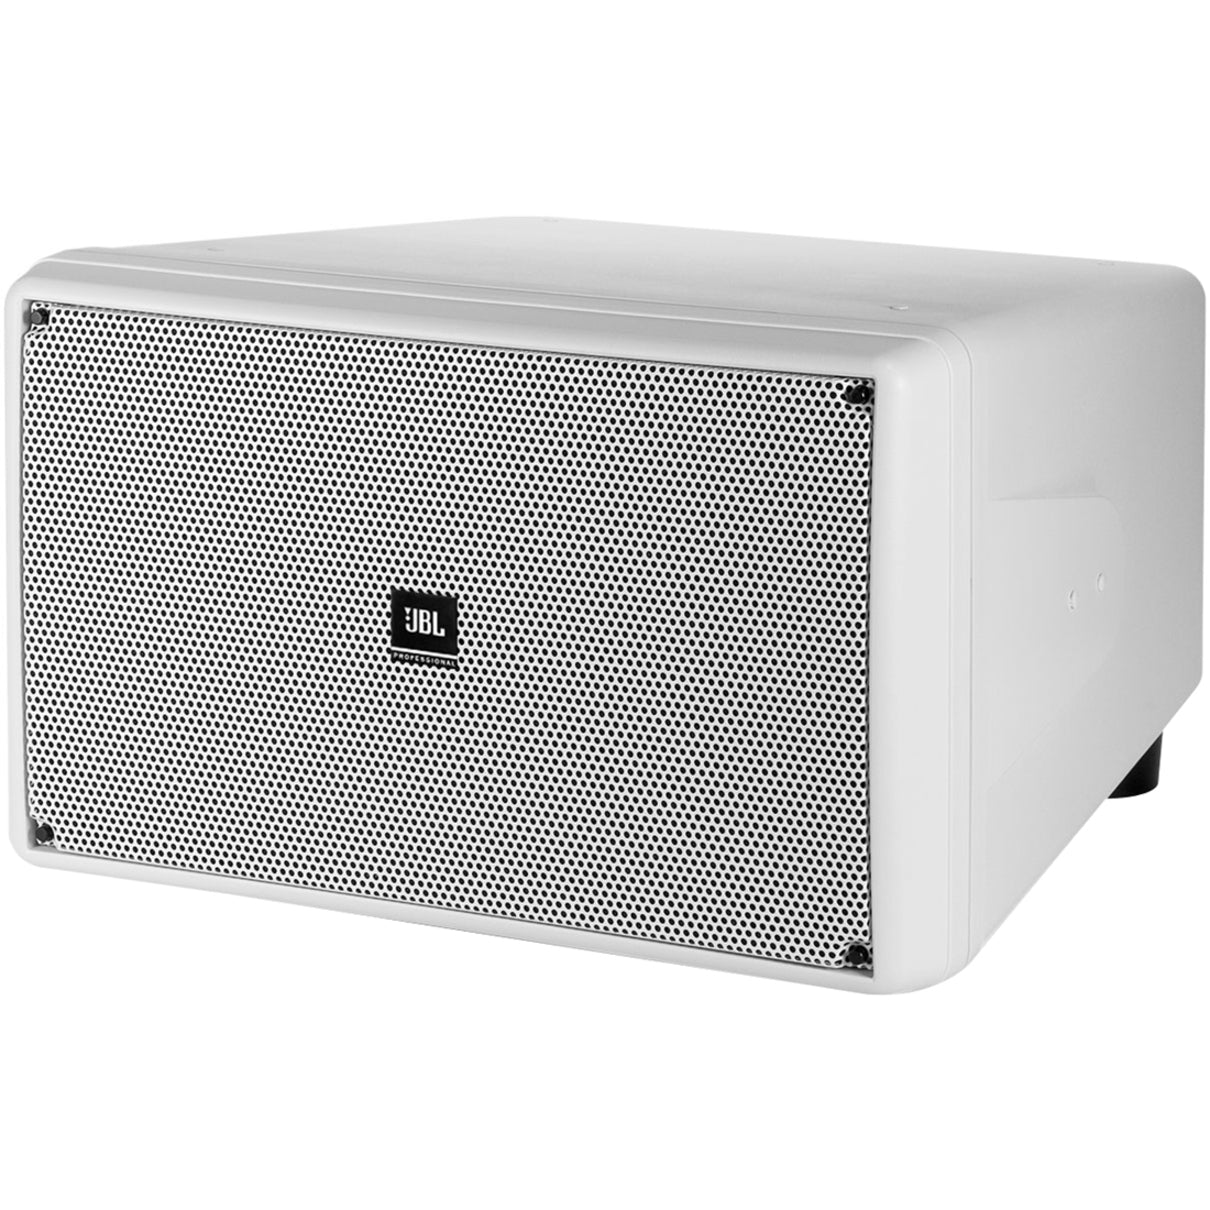 JBL Professional CONTROL SB2210 -WH Control Profesional SB2210 Woofer, Compact Low Profile High-Power Subwoofer, White